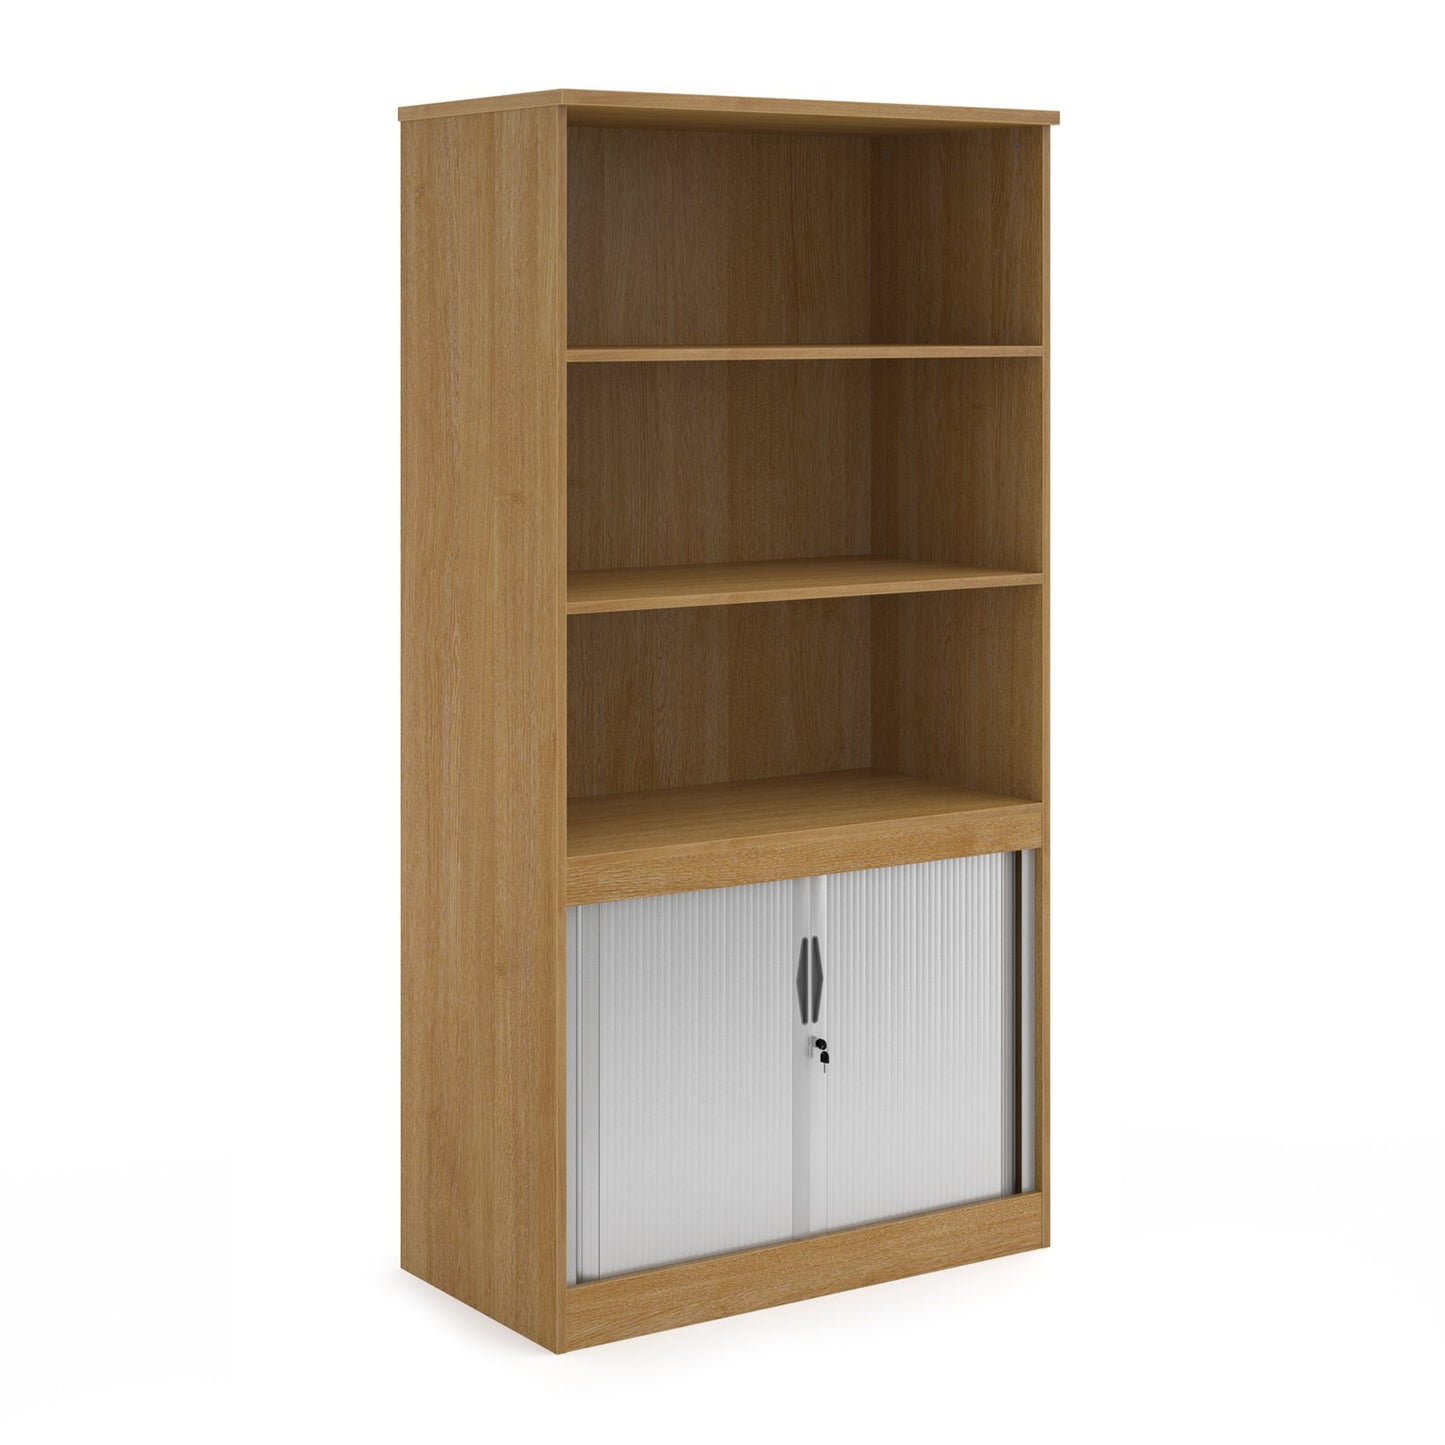 Systems Combi Unit With Tambour And Open Top 1600mm - White